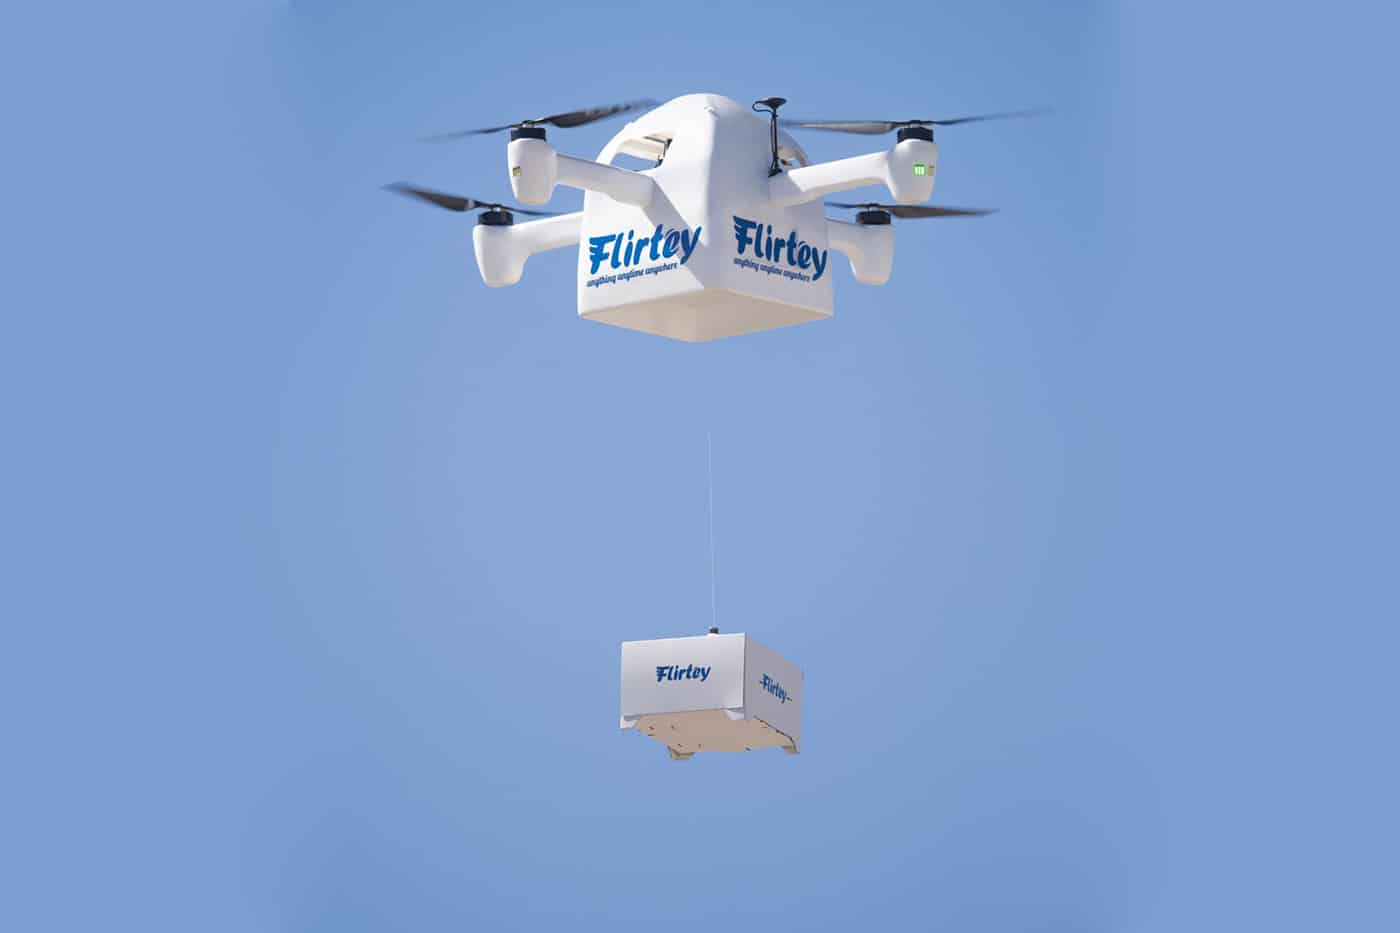 Flirtey Eagle delivery drone can deliver packages less than 10 minutes